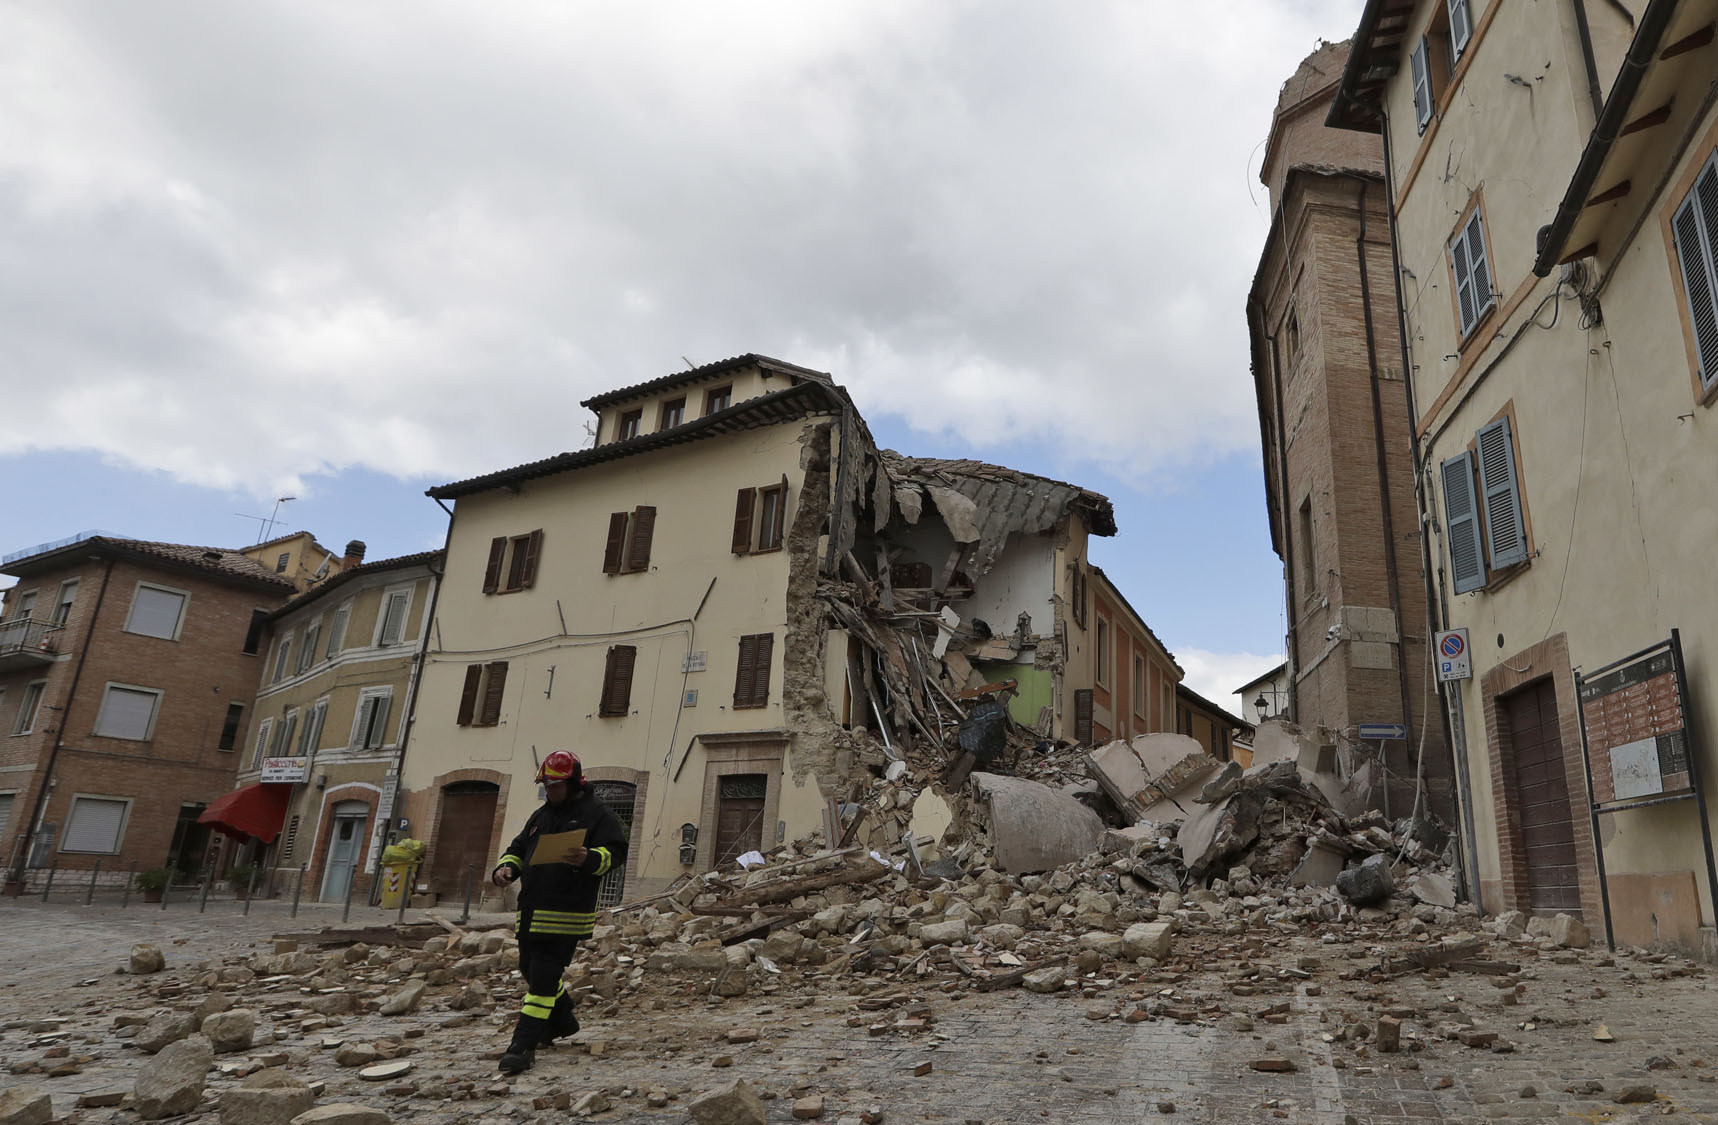 Thousands displaced by earthquakes in central Italy